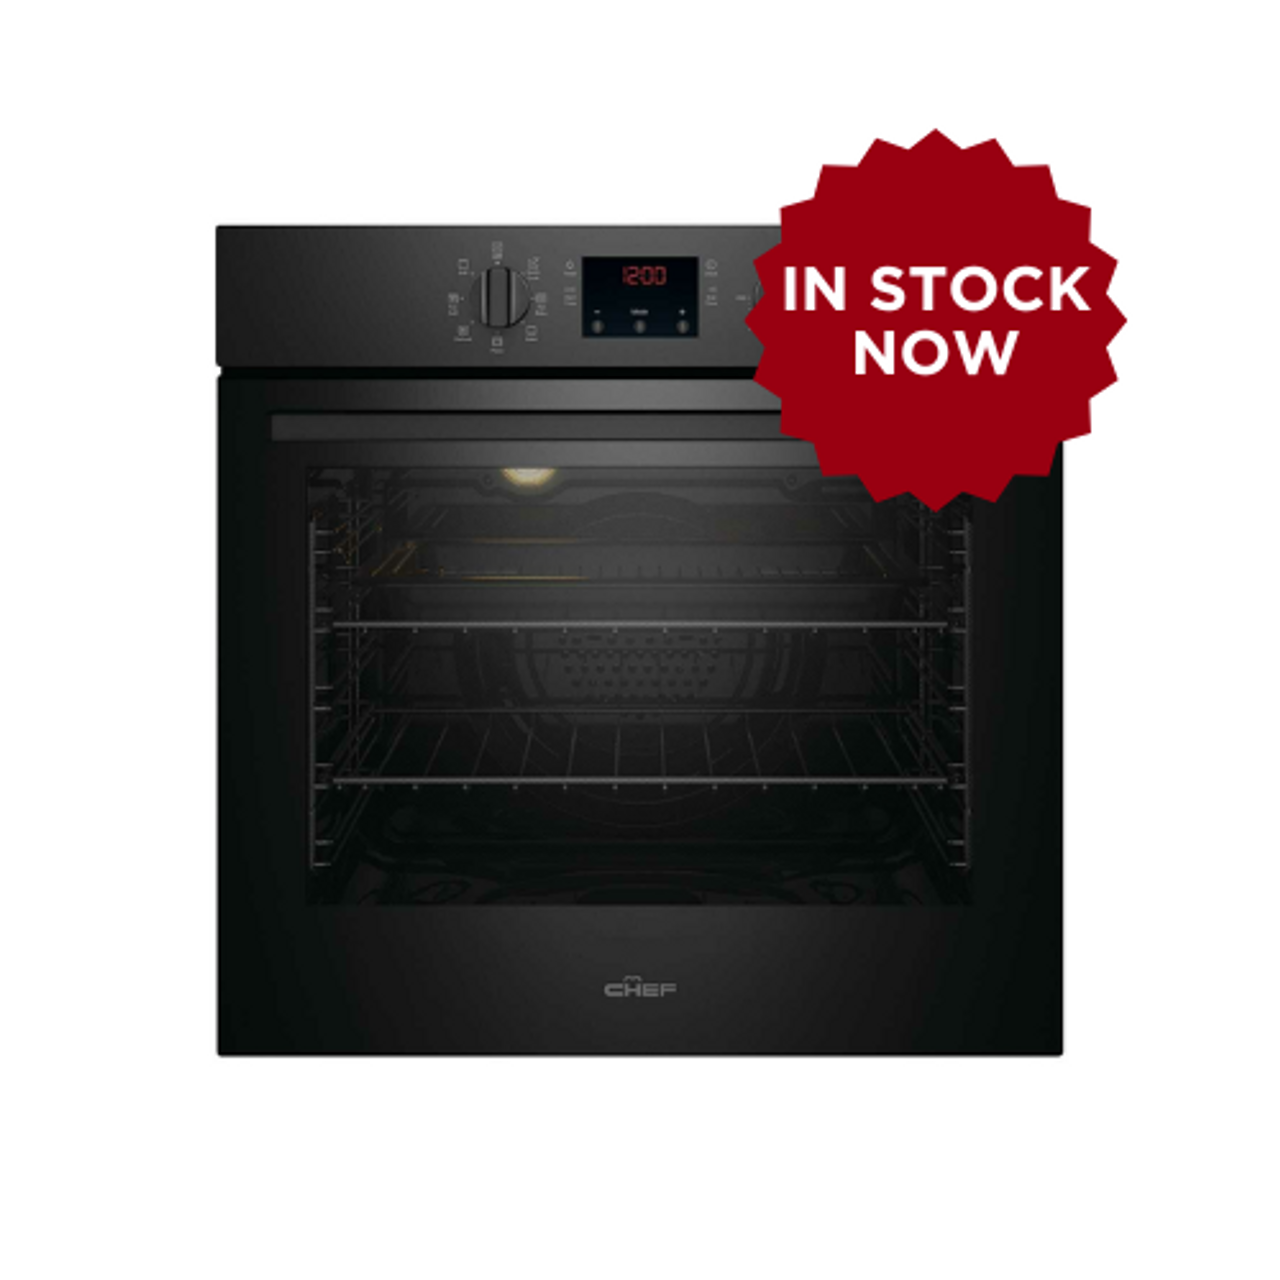 CVEP614DB - 60cm Multifunction Oven, Pyrolytic Cleaning - Black